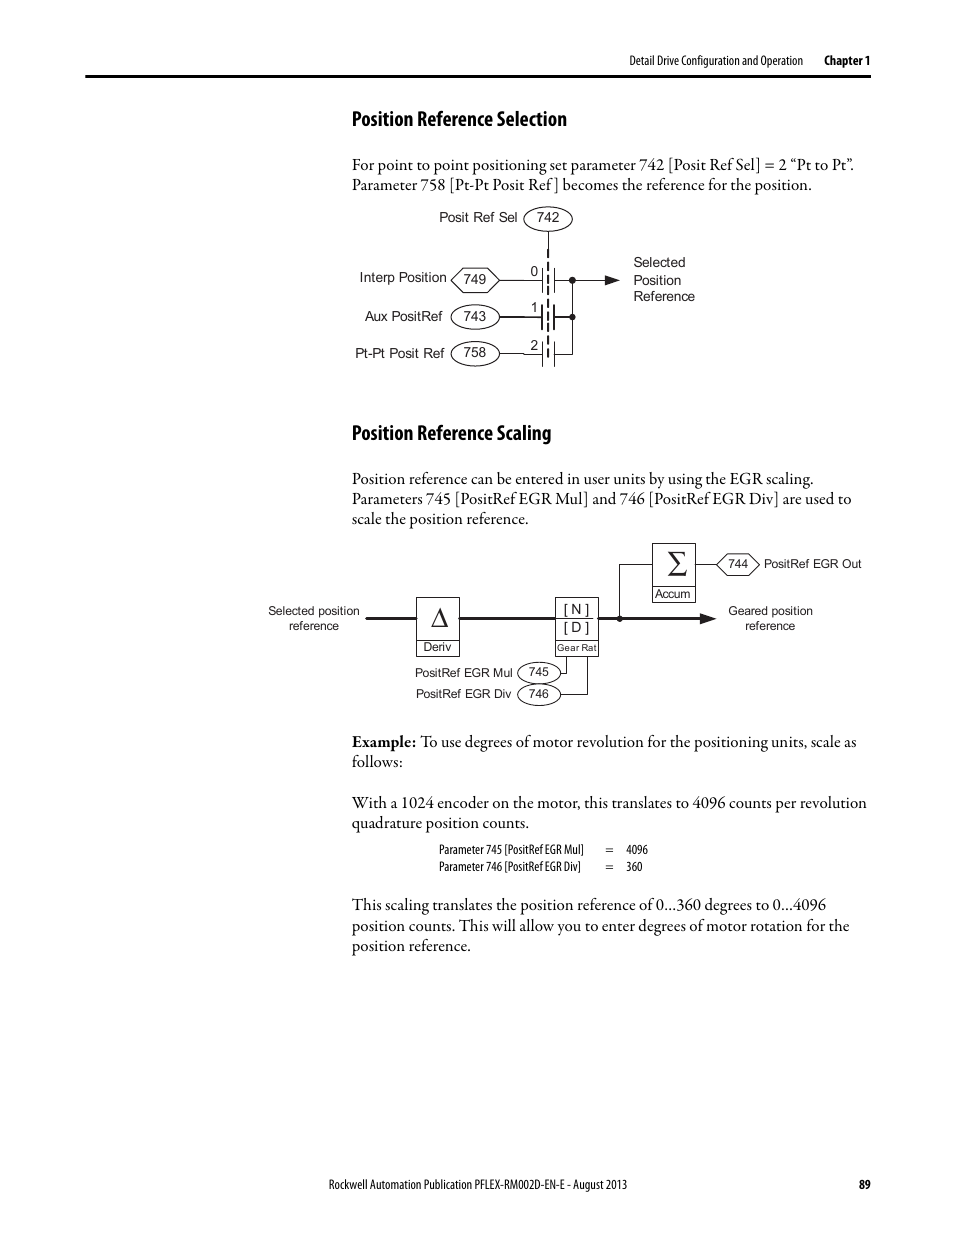 Position reference selection, Position reference scaling | Rockwell Automation 20D PowerFlex 700S with Phase I Control Reference Manual User Manual | Page 89 / 190